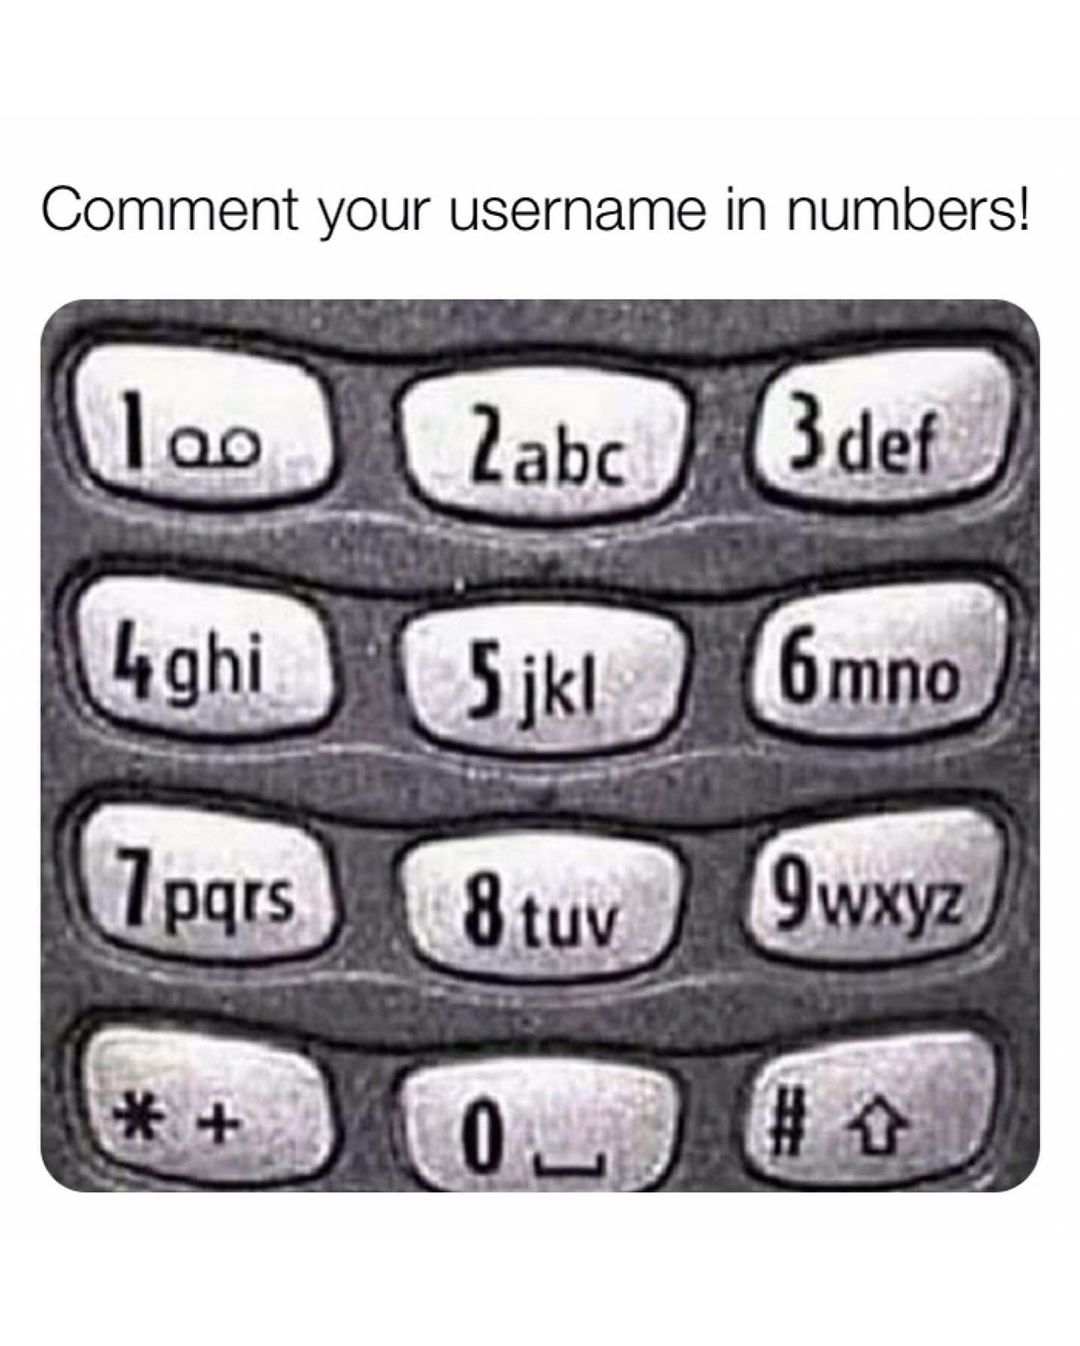 Comment your username in numbers!